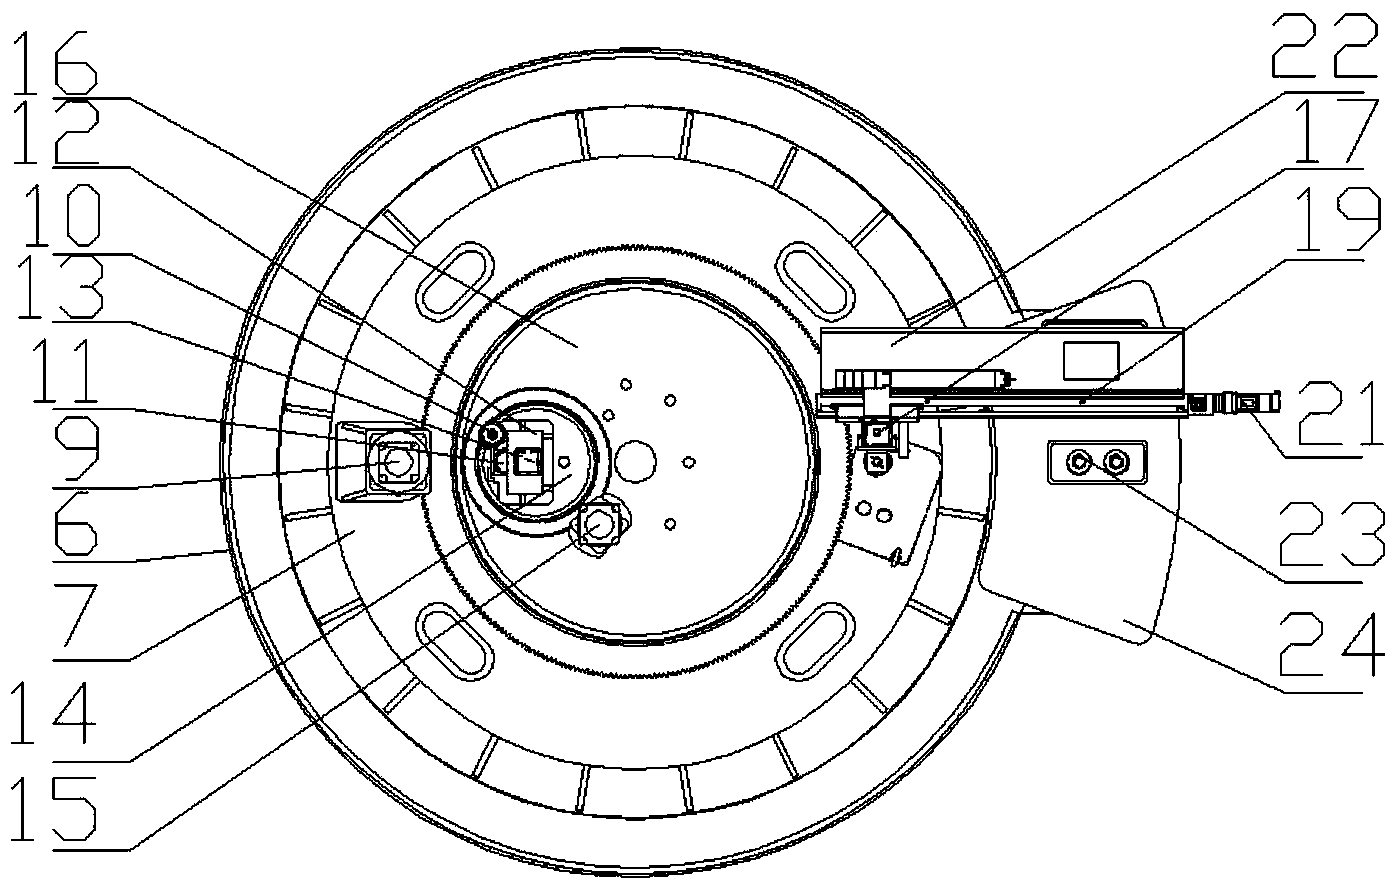 Verification device for in-pile refueling system in liquid-state heavy metal reactor